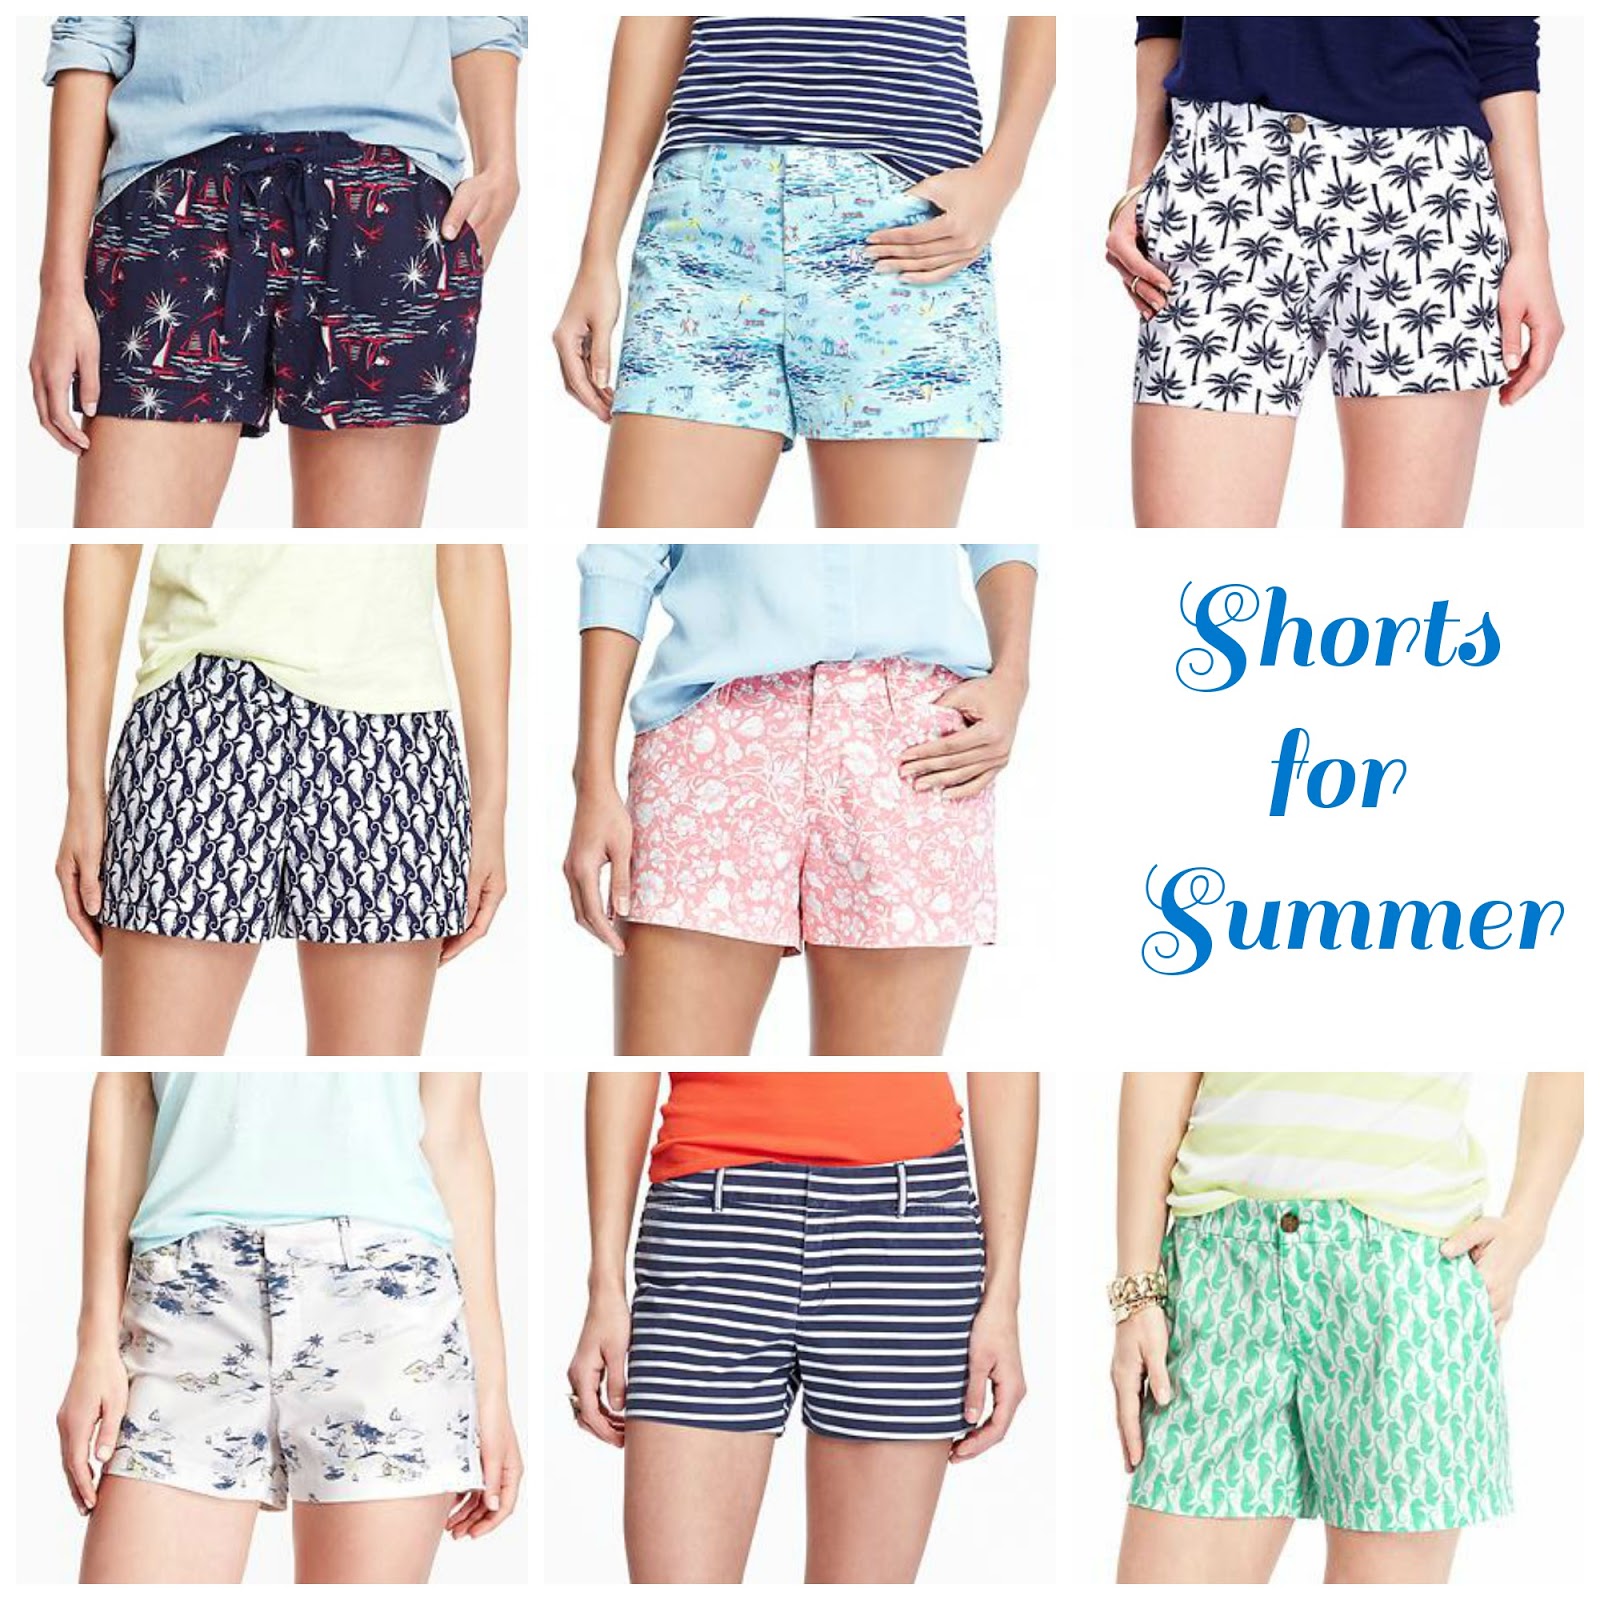 Nautical by Nature: Summer of Shorts